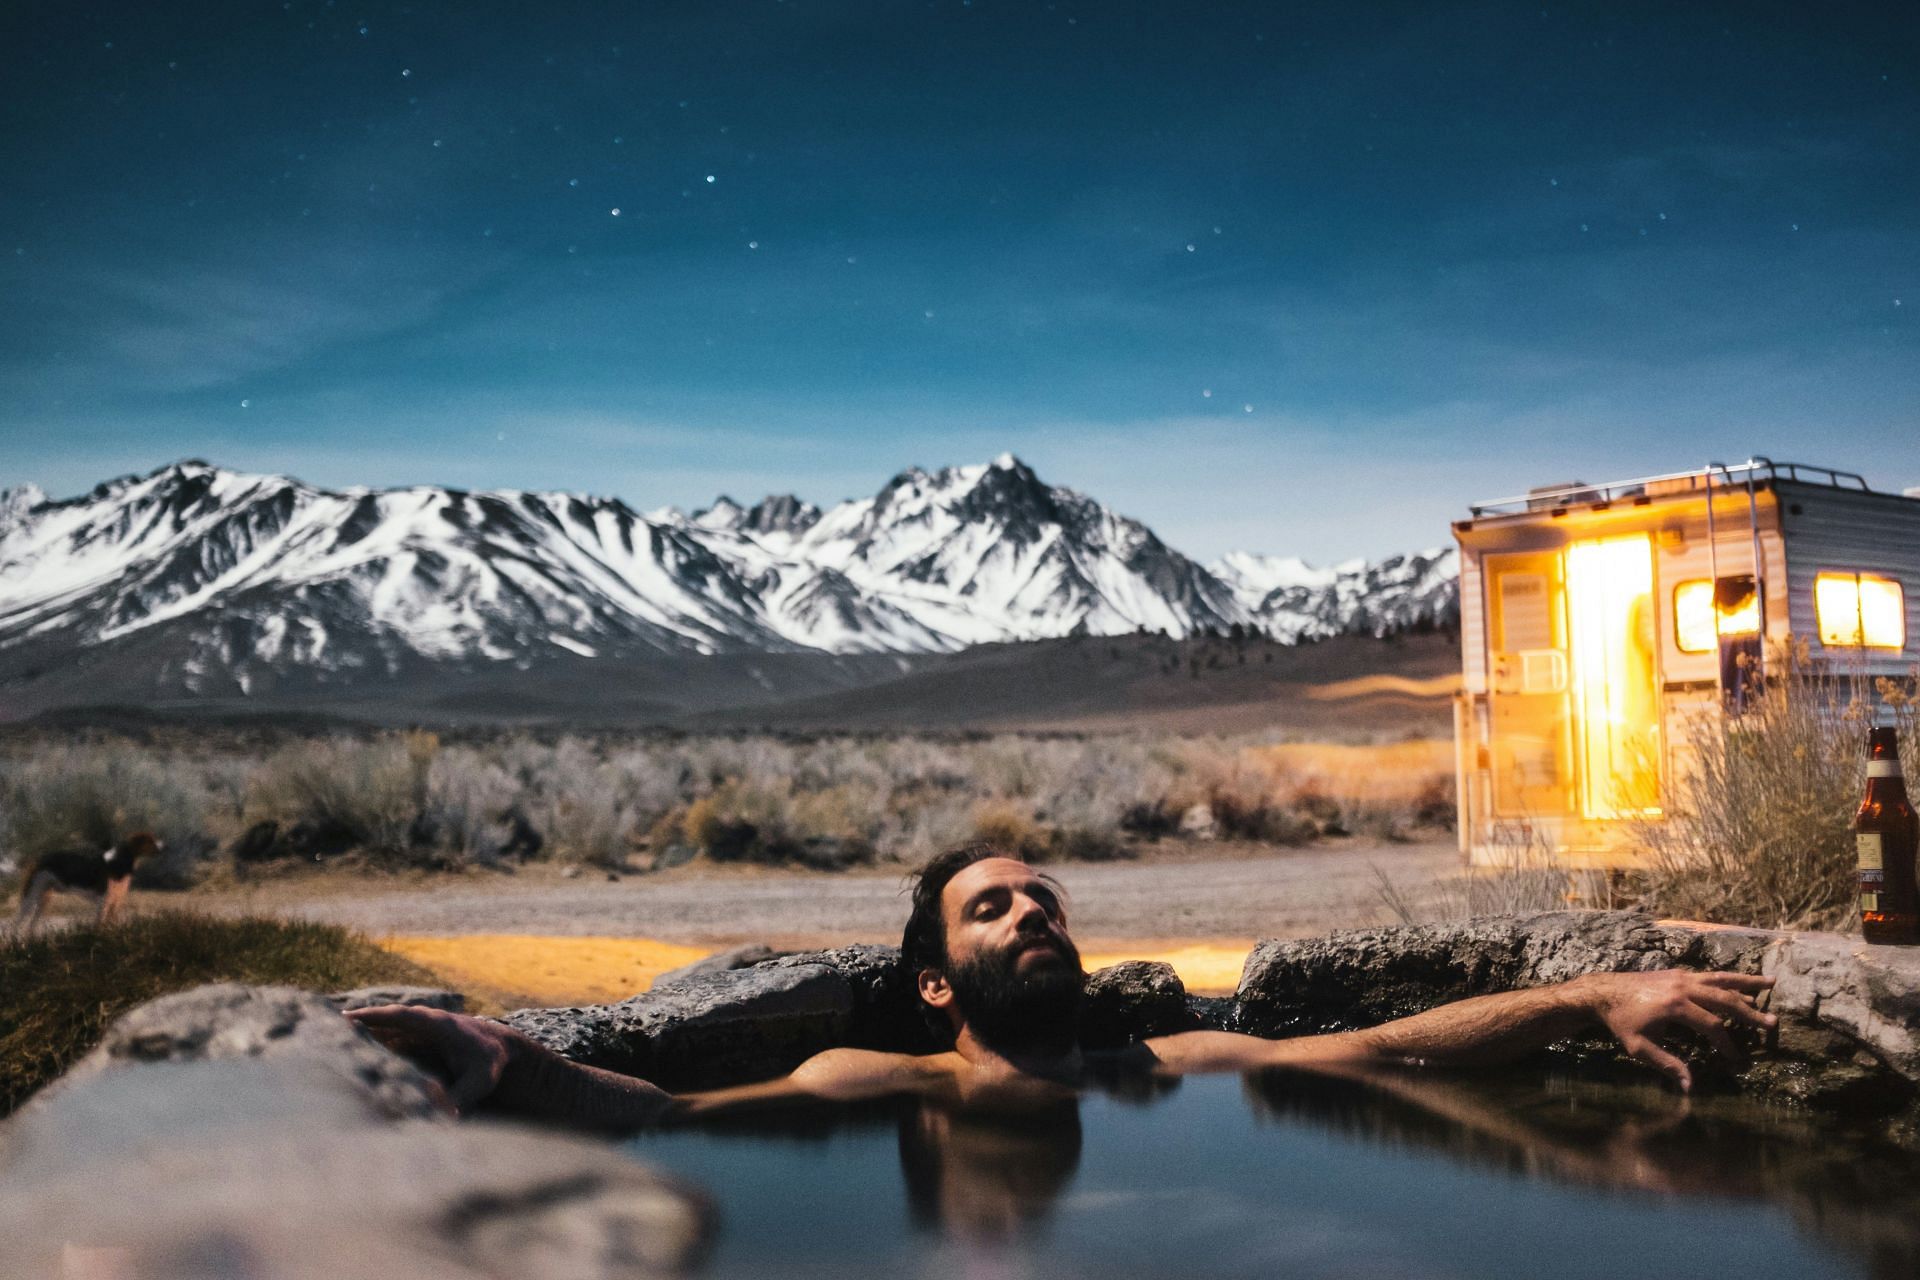 To enjoy cold water benefits, cold baths can be challenging in the beginning (Image by Robson Hatsukami Morgan/Unsplash)